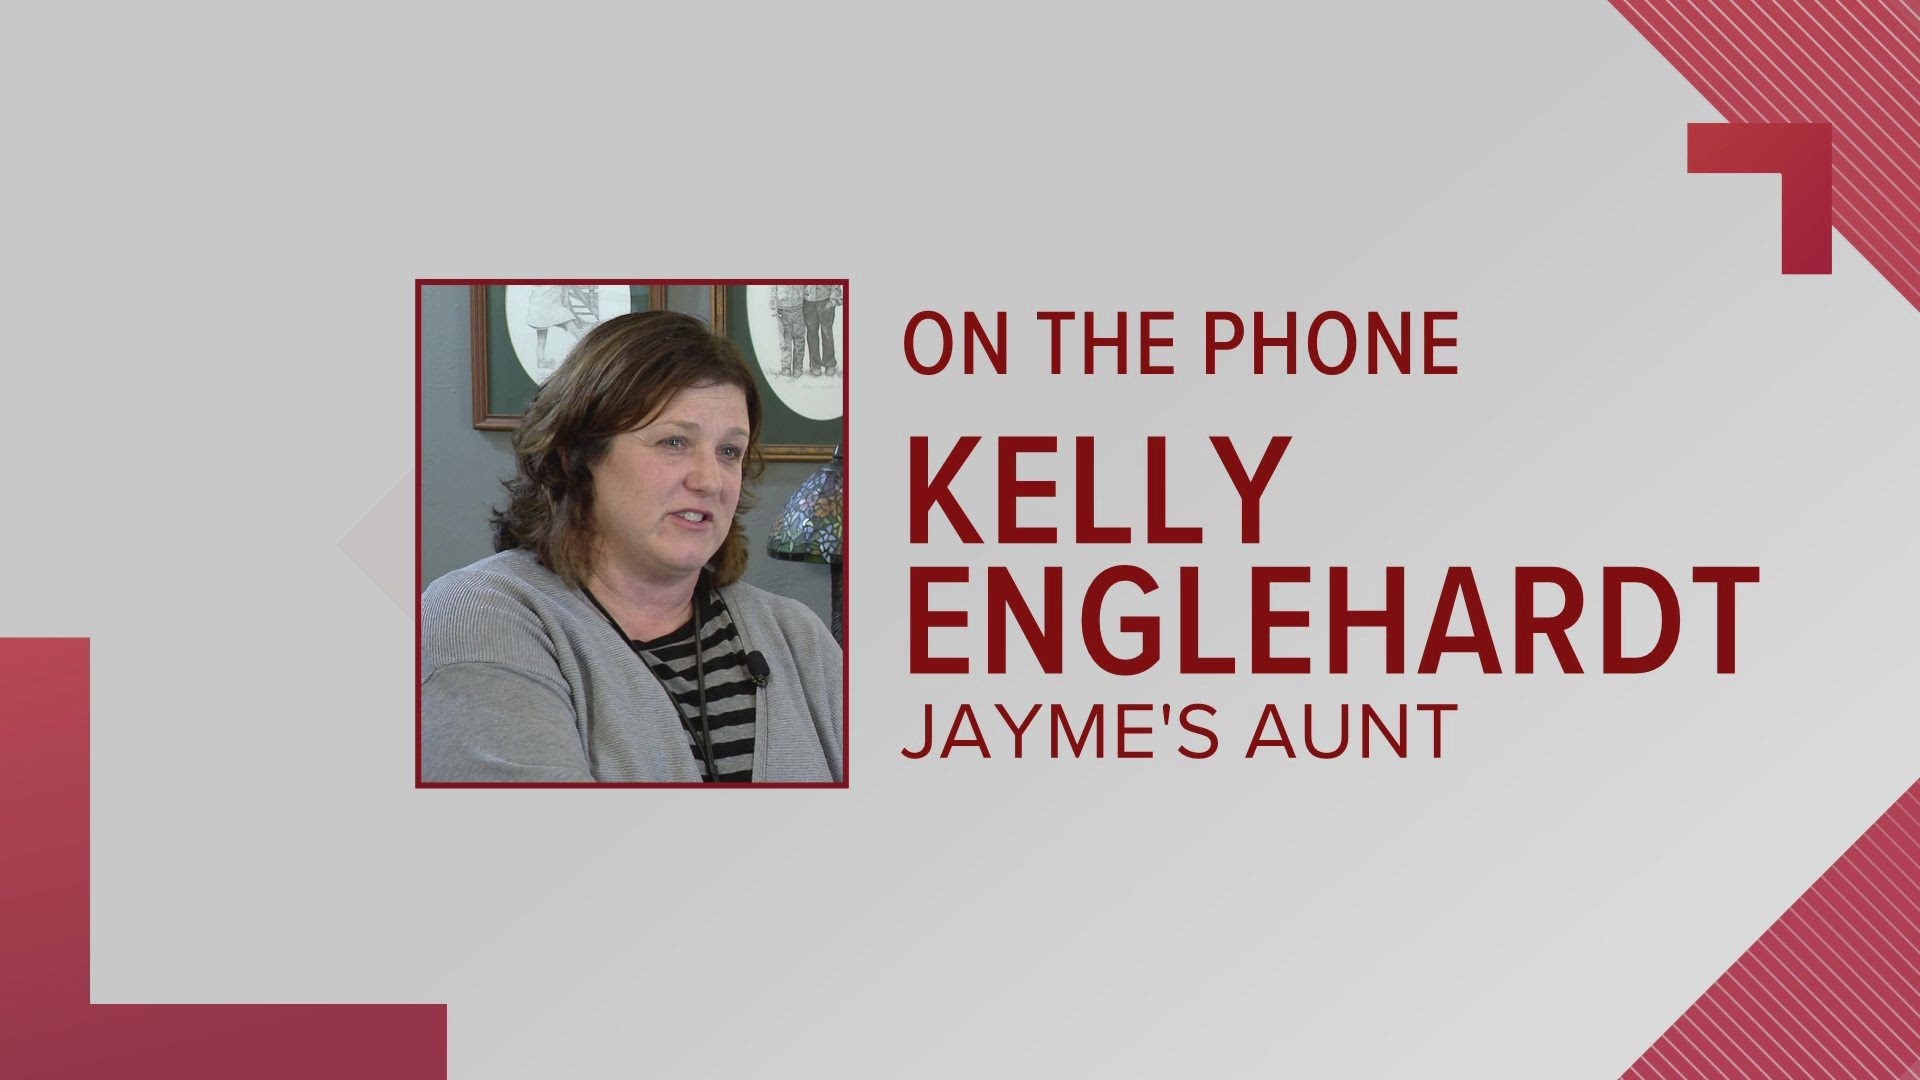 Kelly Engelhardt, Jayme Closs' aunt, said there was too much love and support to give up hope.